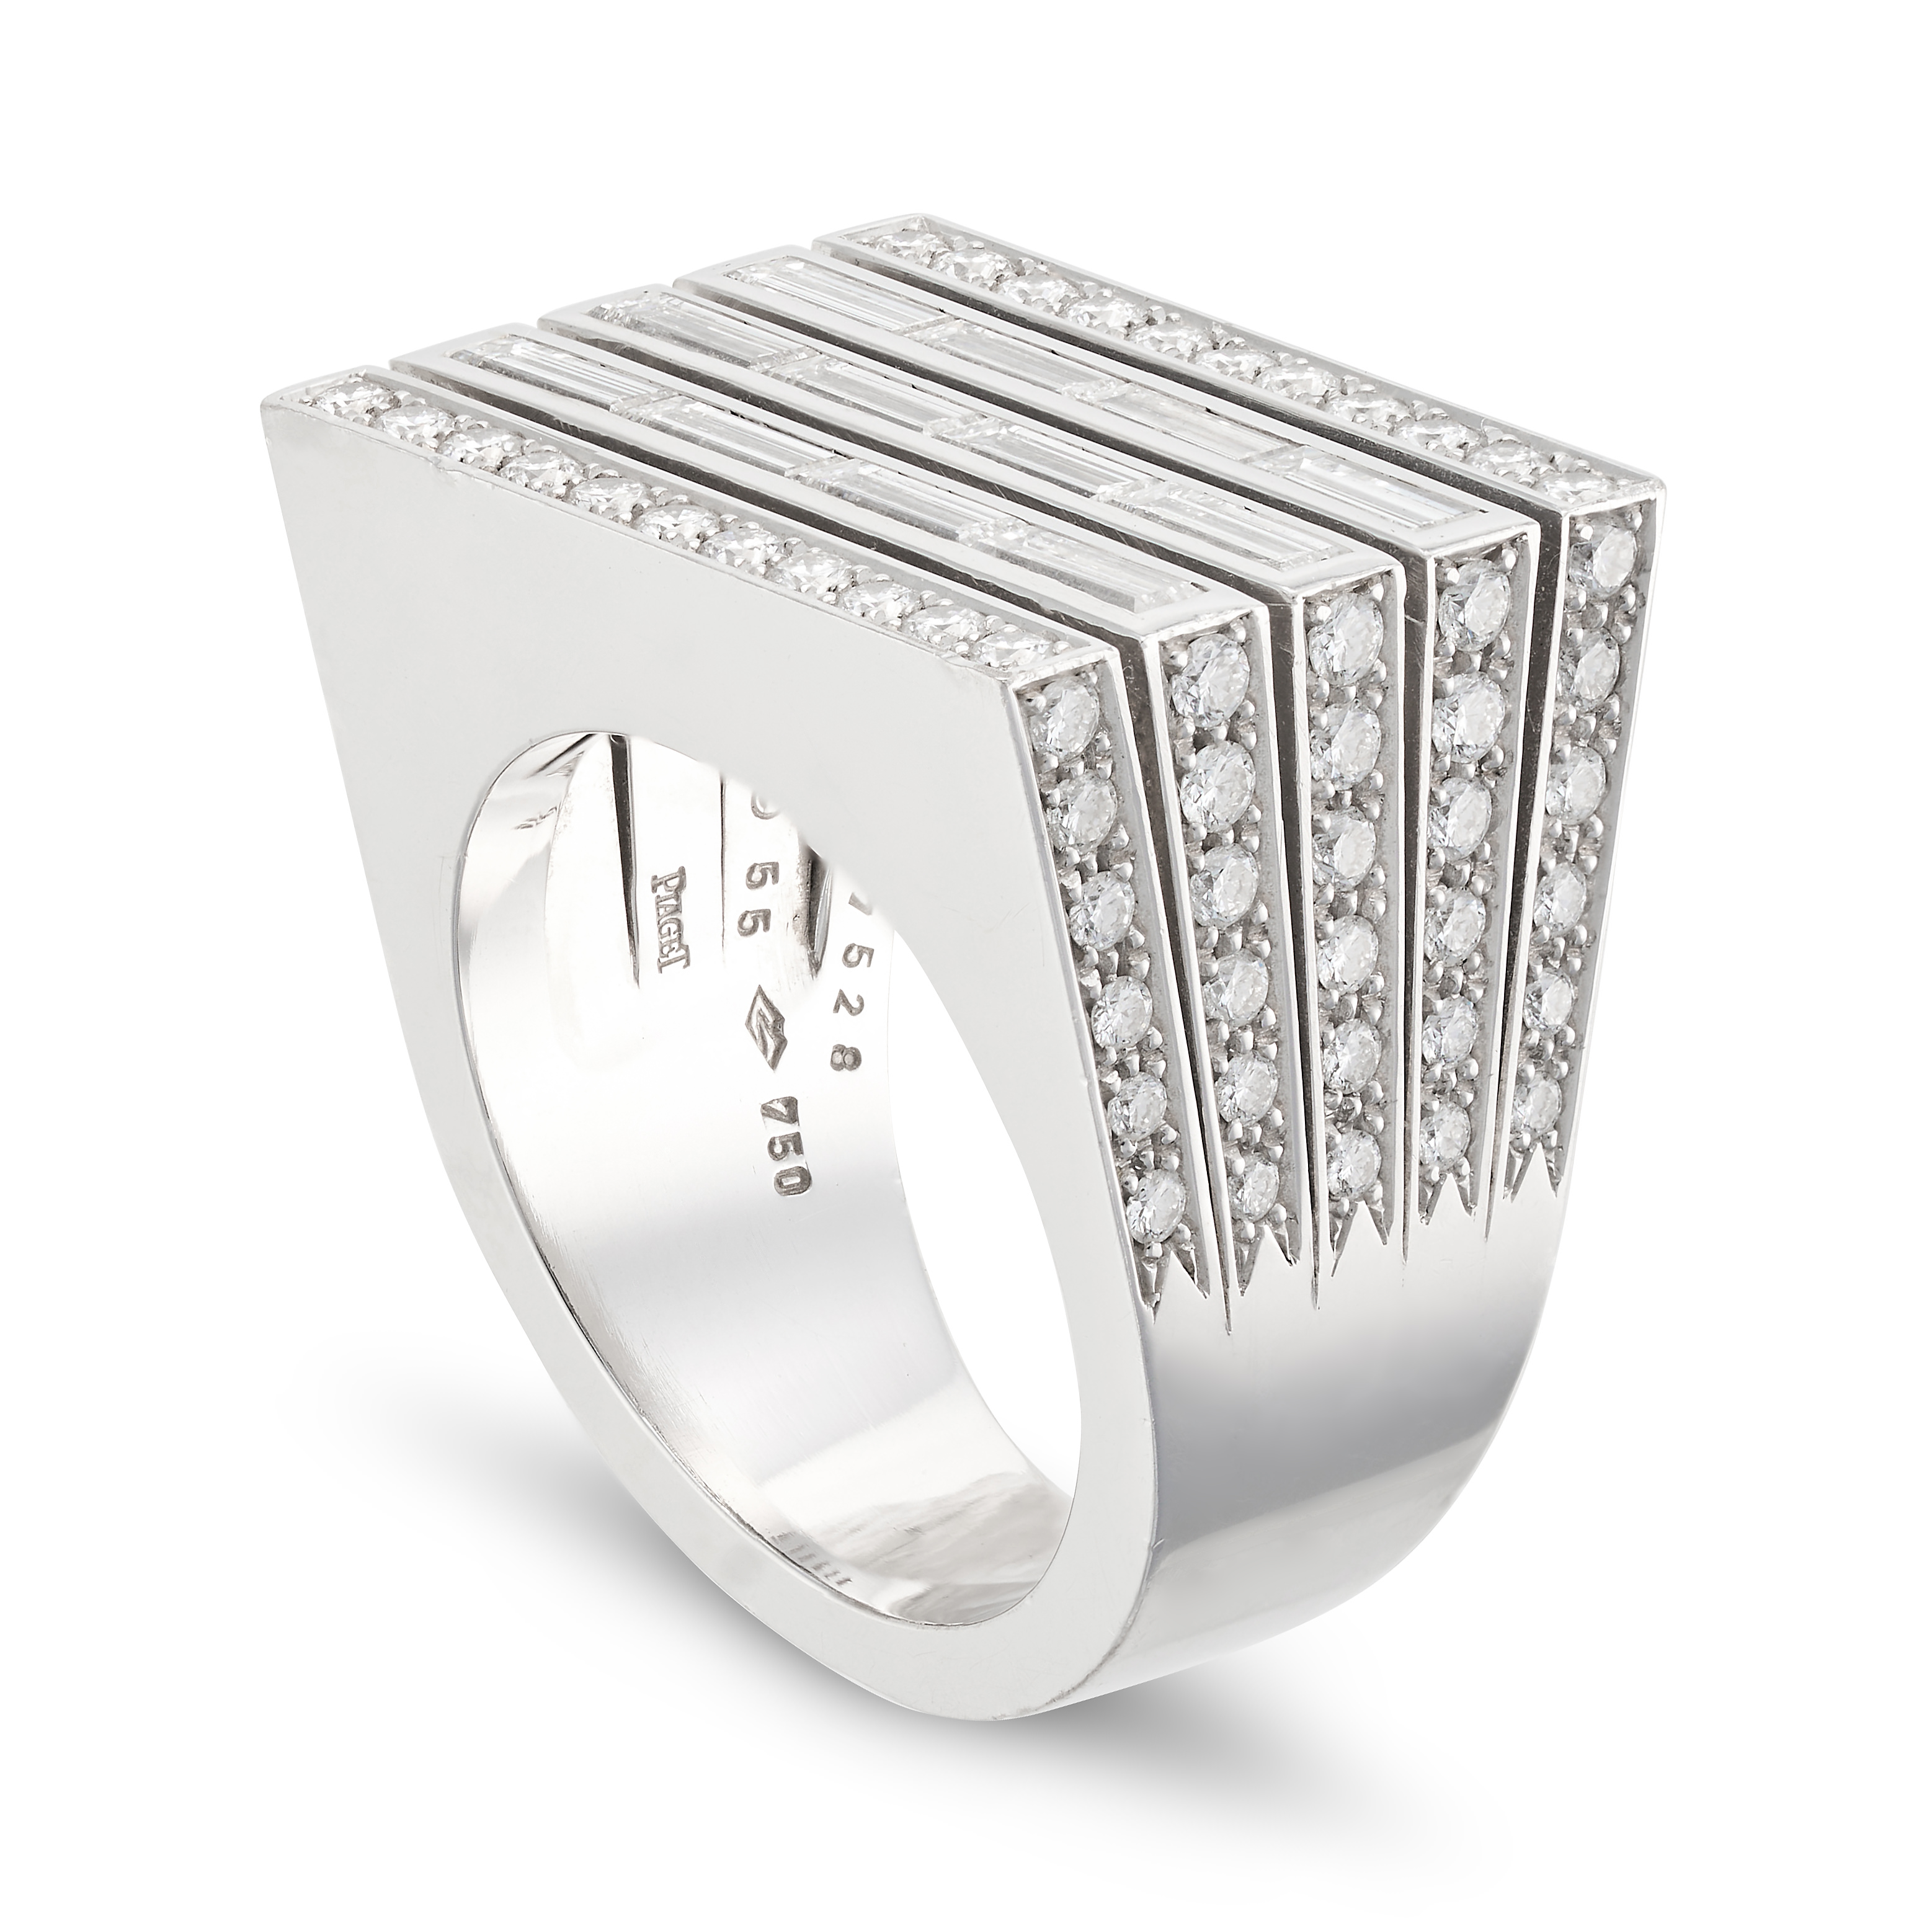 PIAGET, A DIAMOND FREEDOM RING set with three rows of baguette cut diamonds, accented by rows of ... - Image 2 of 2